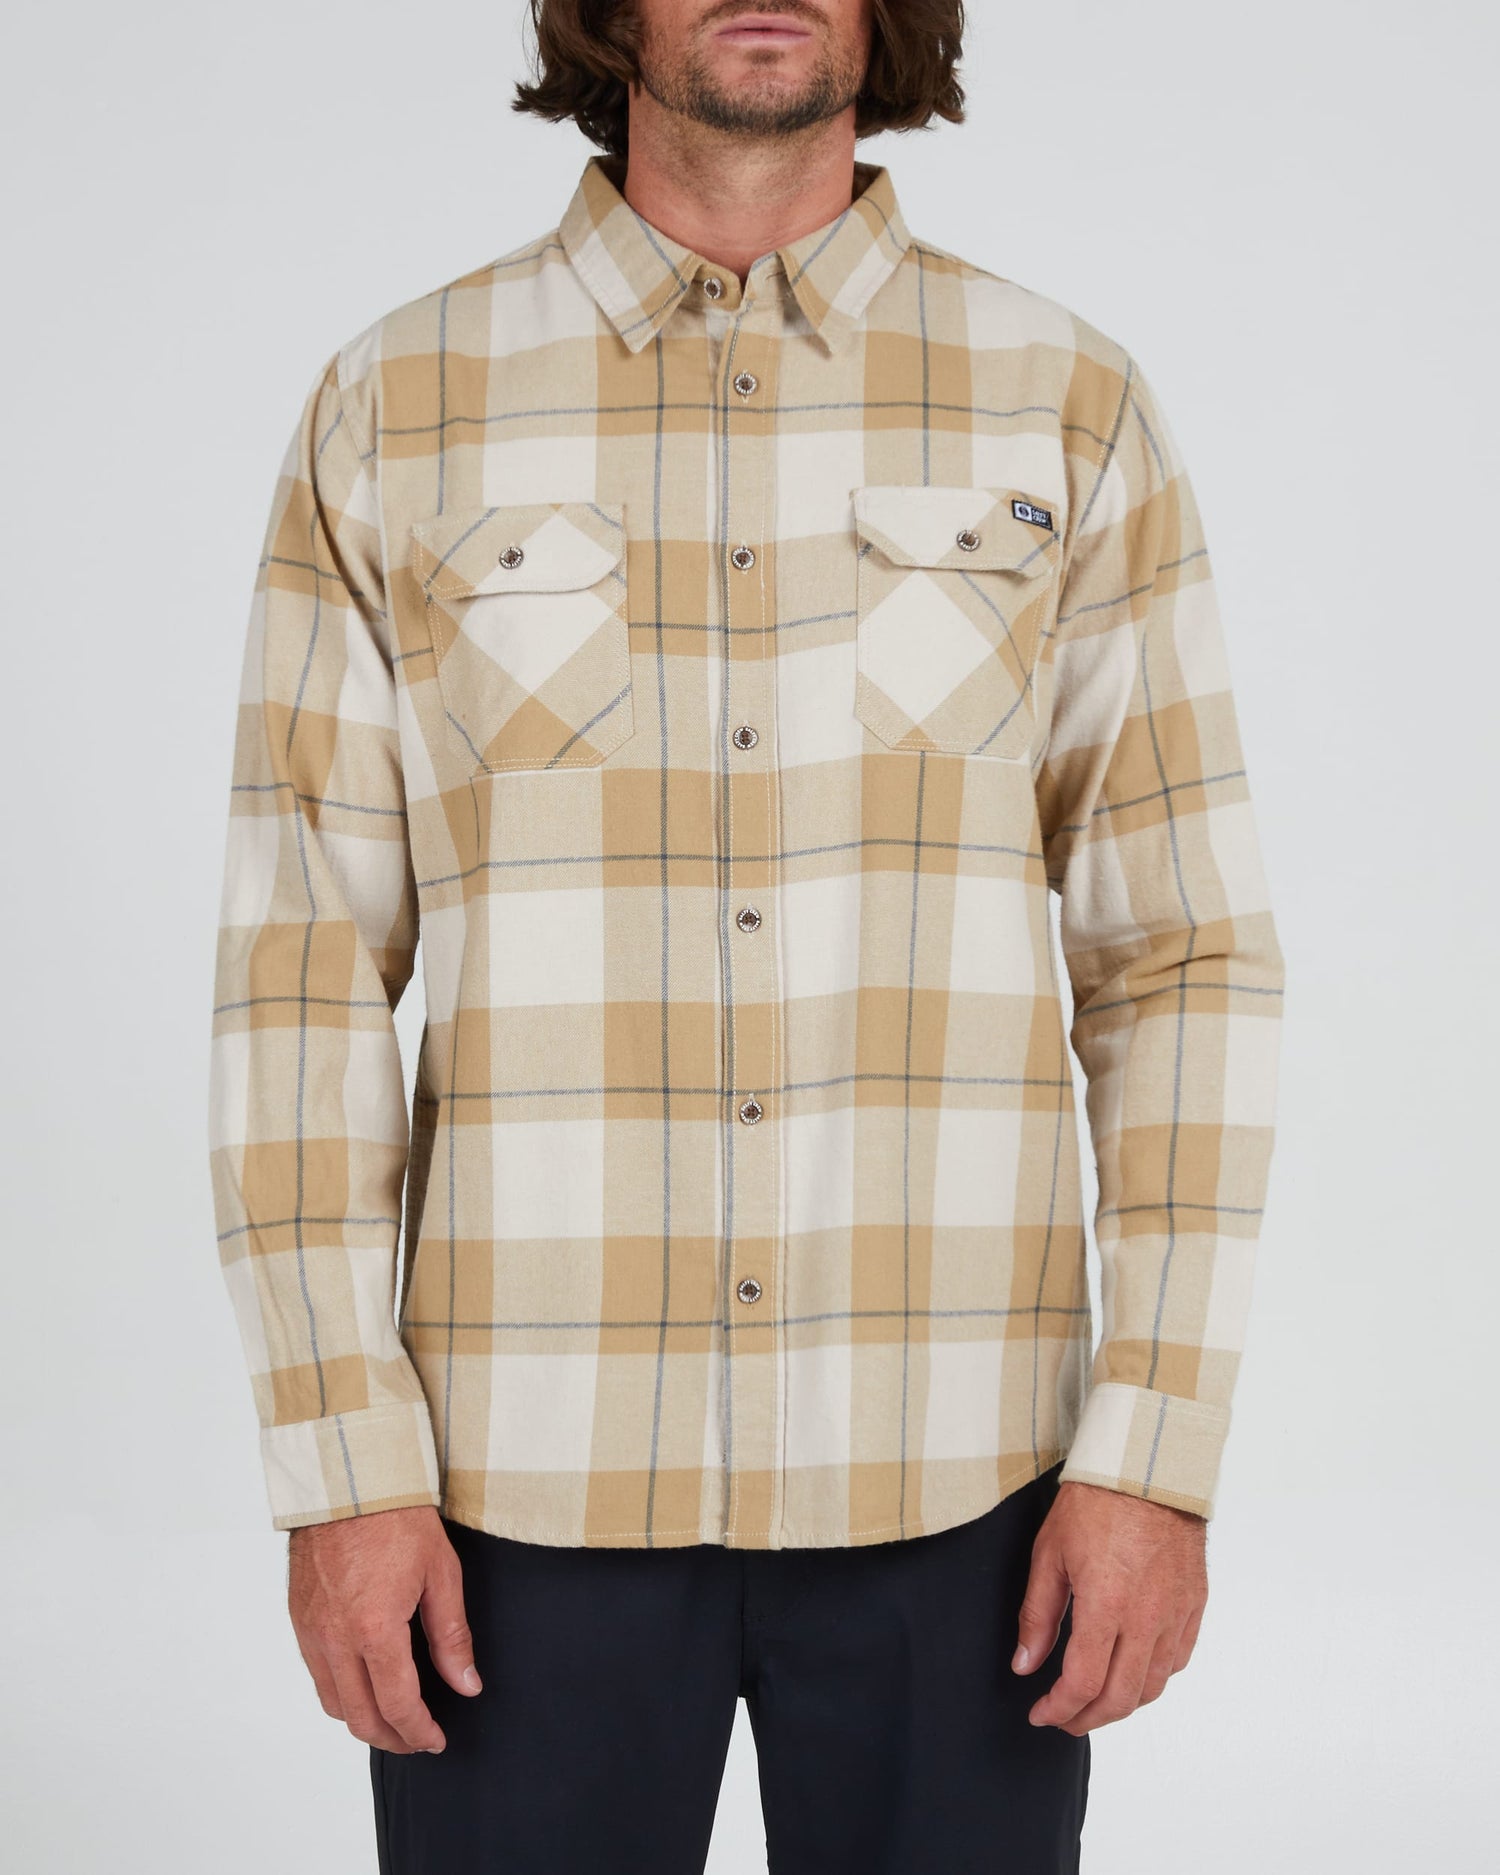 Salty crew WOVEN SHIRTS FIRST LIGHT FLANNEL - Peyote in Peyote